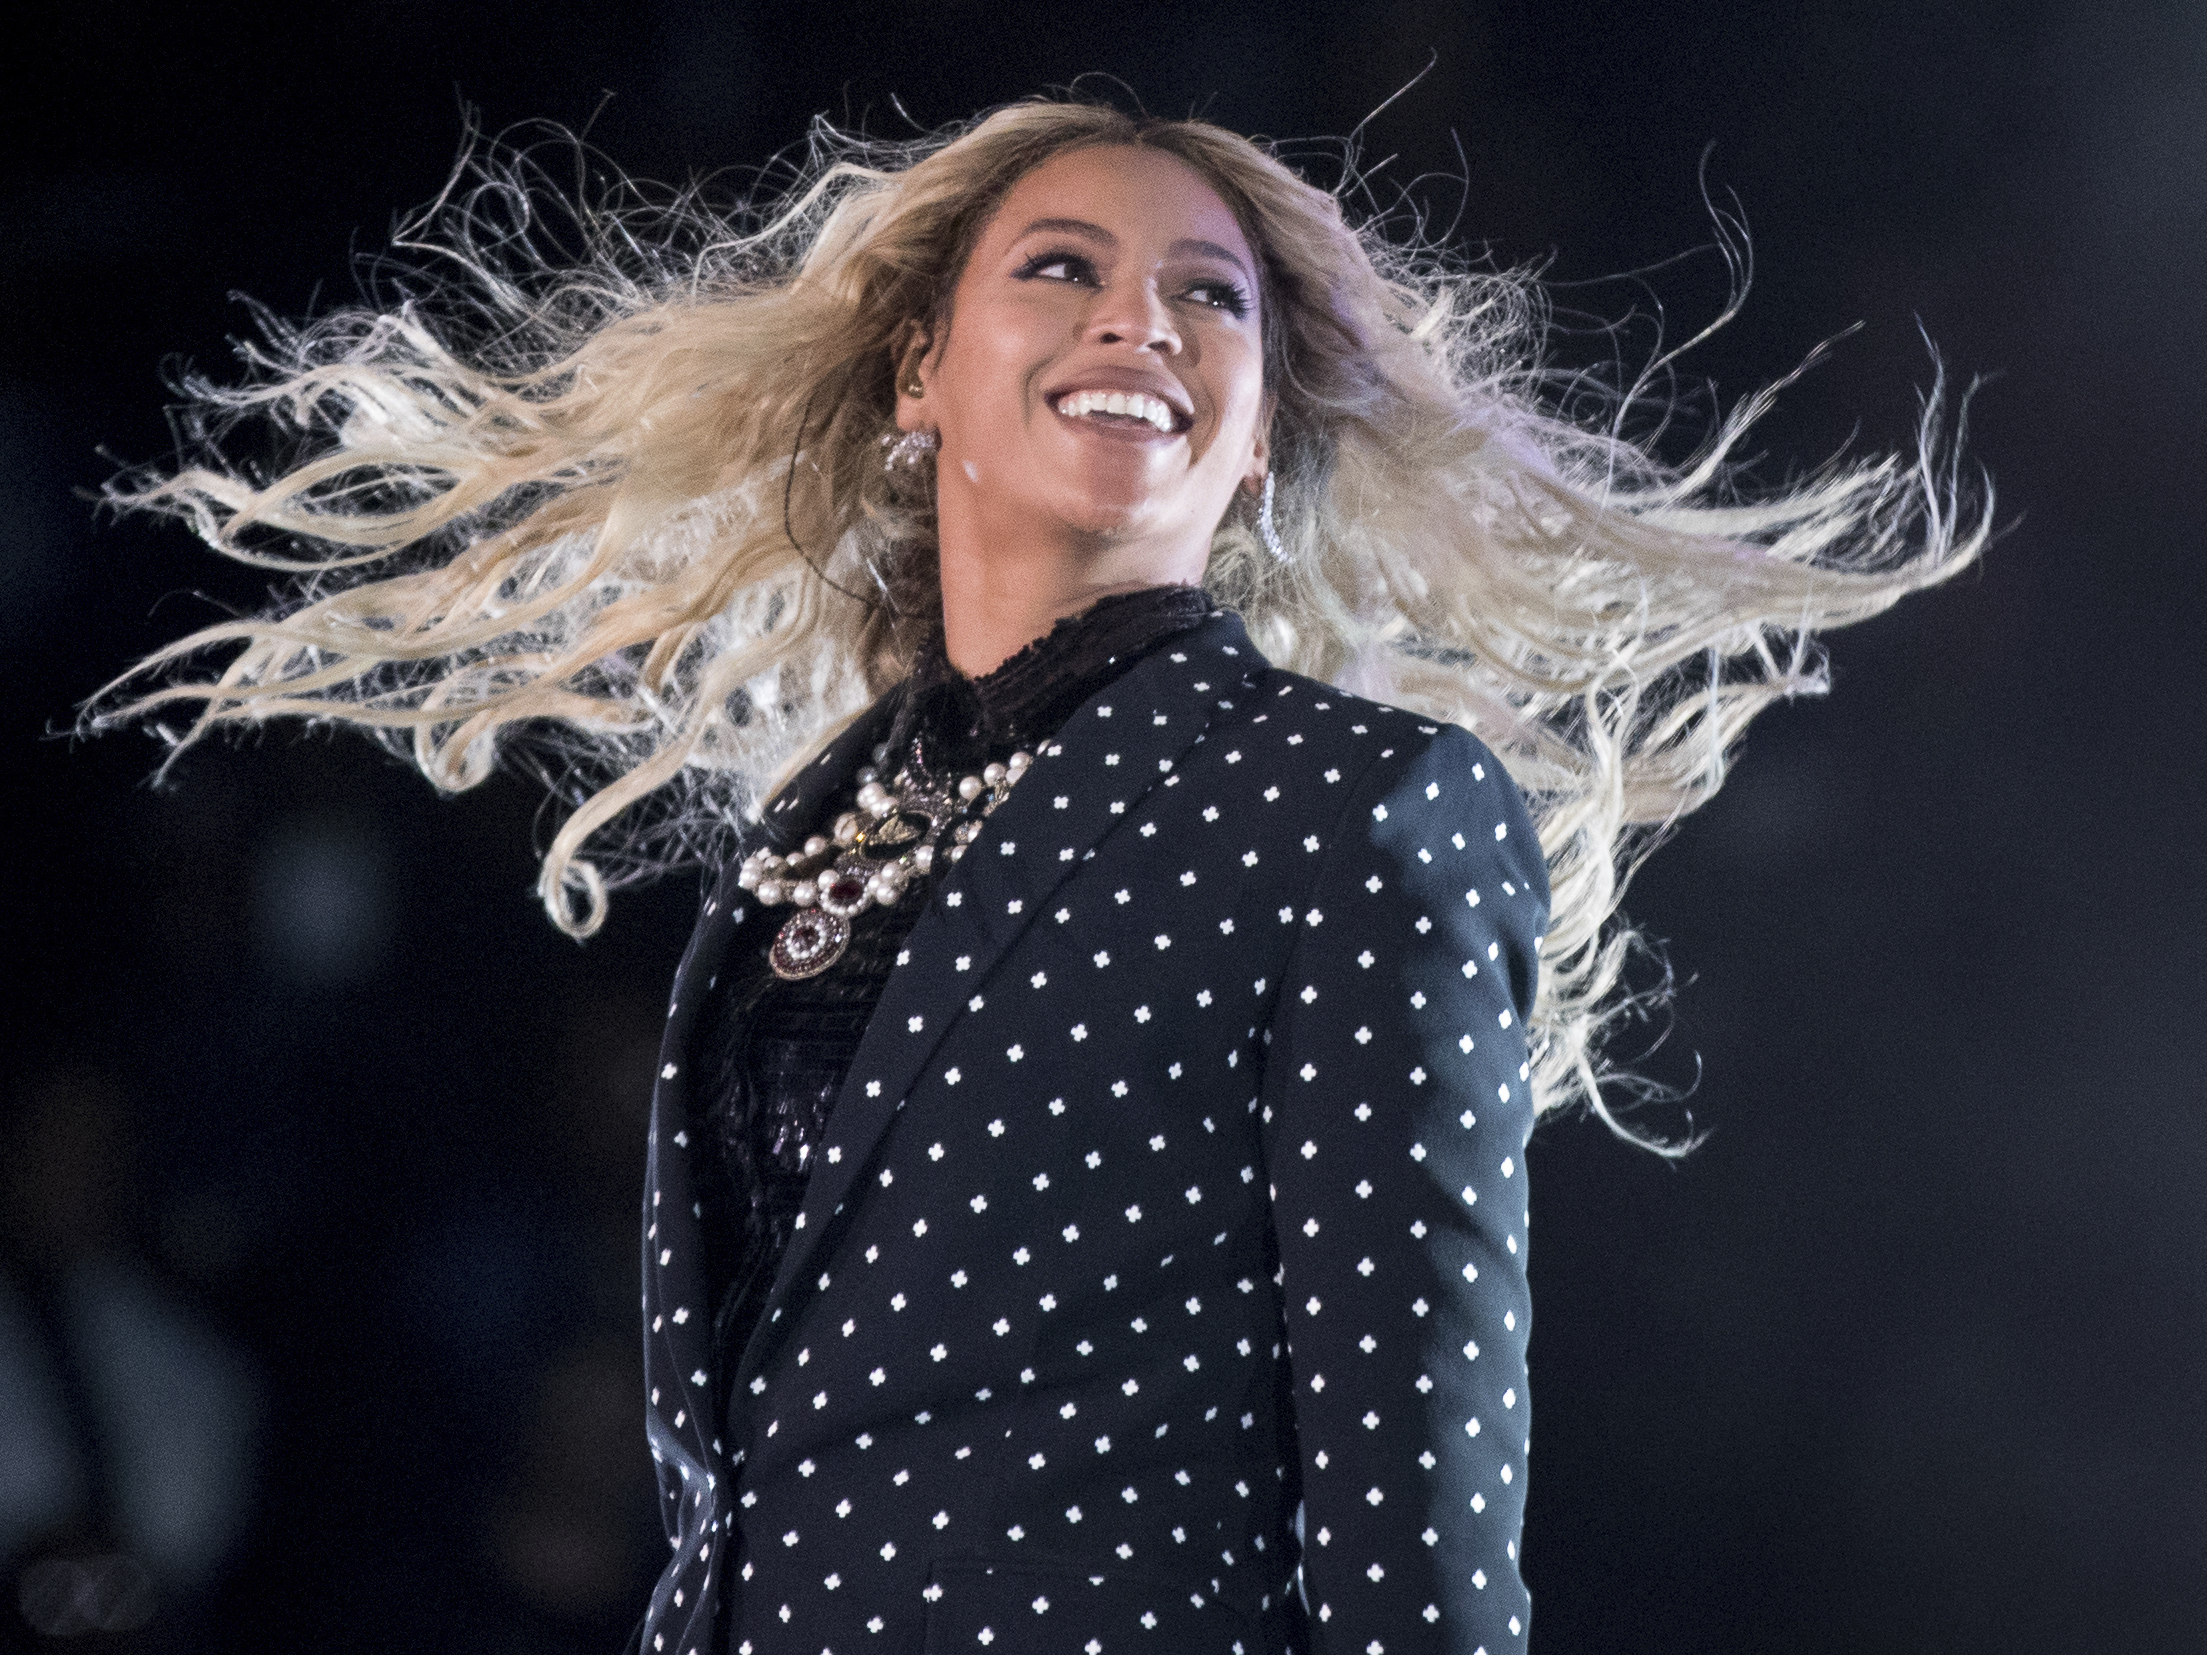 Beyoncé’s new album is inspired by backlash to her entering the country music genre